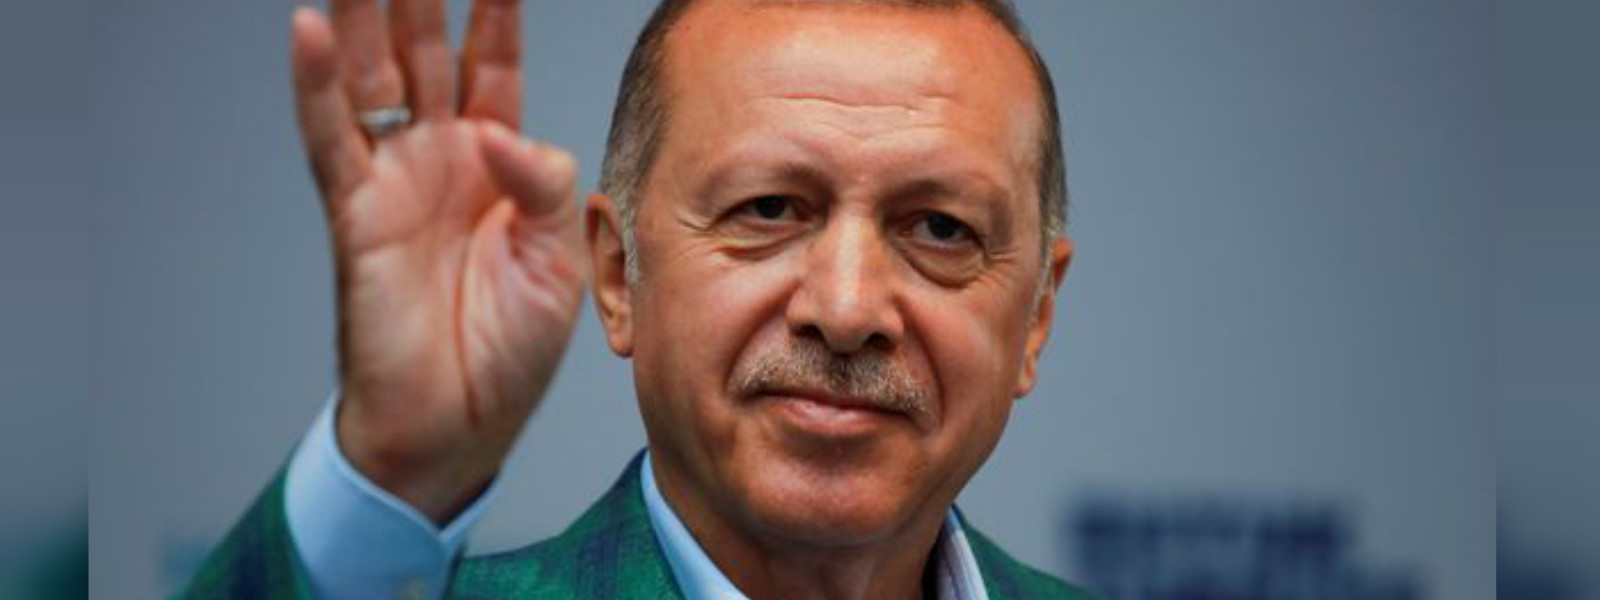  Erdogan claims victory in Presidential election